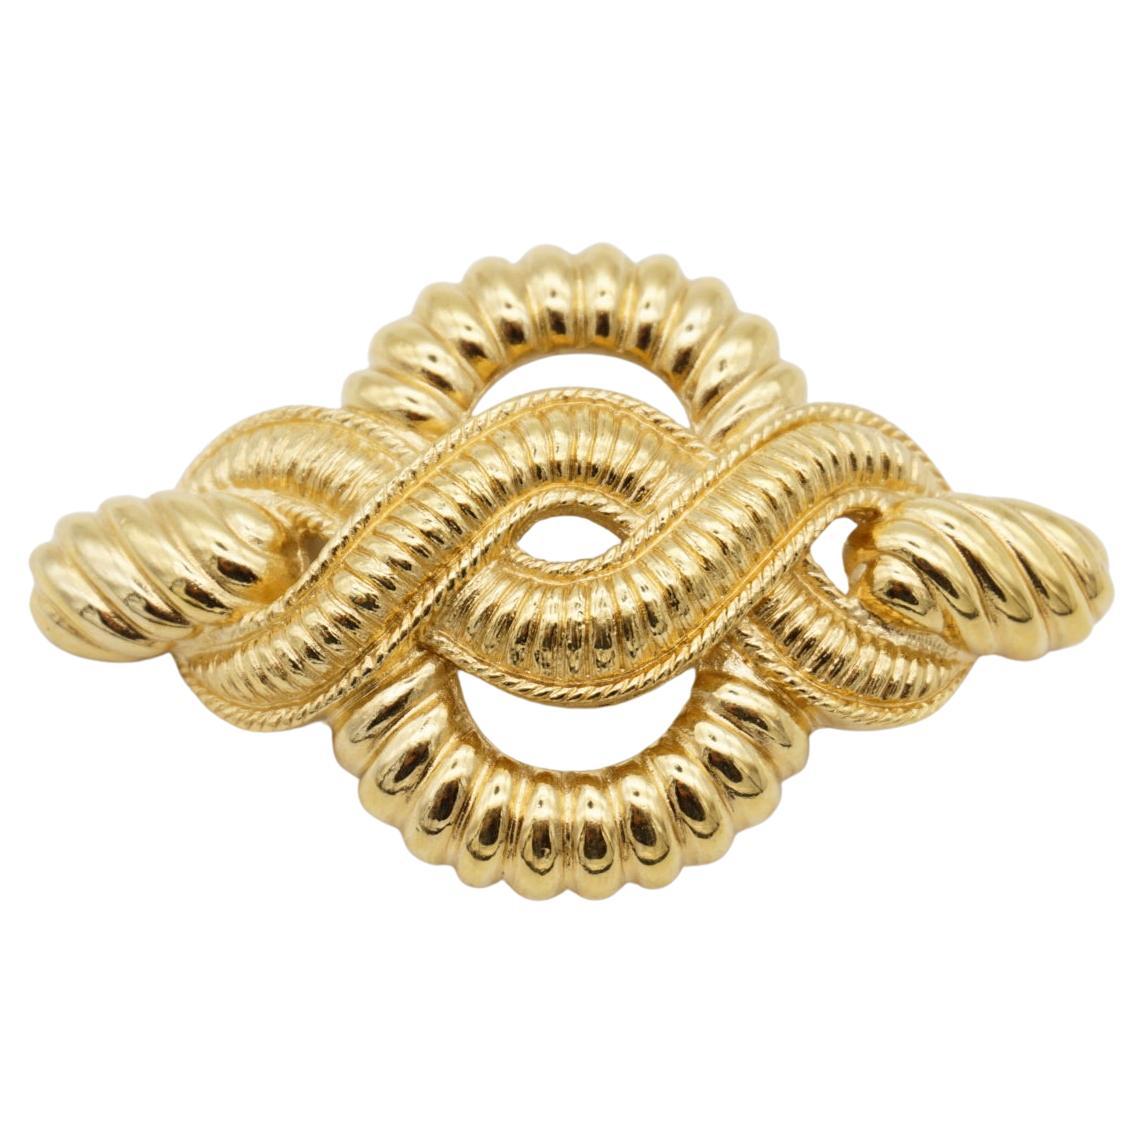 Christian Dior 1980s Vintage Large Textured Interlocked Rope Twist Knot Brooch For Sale